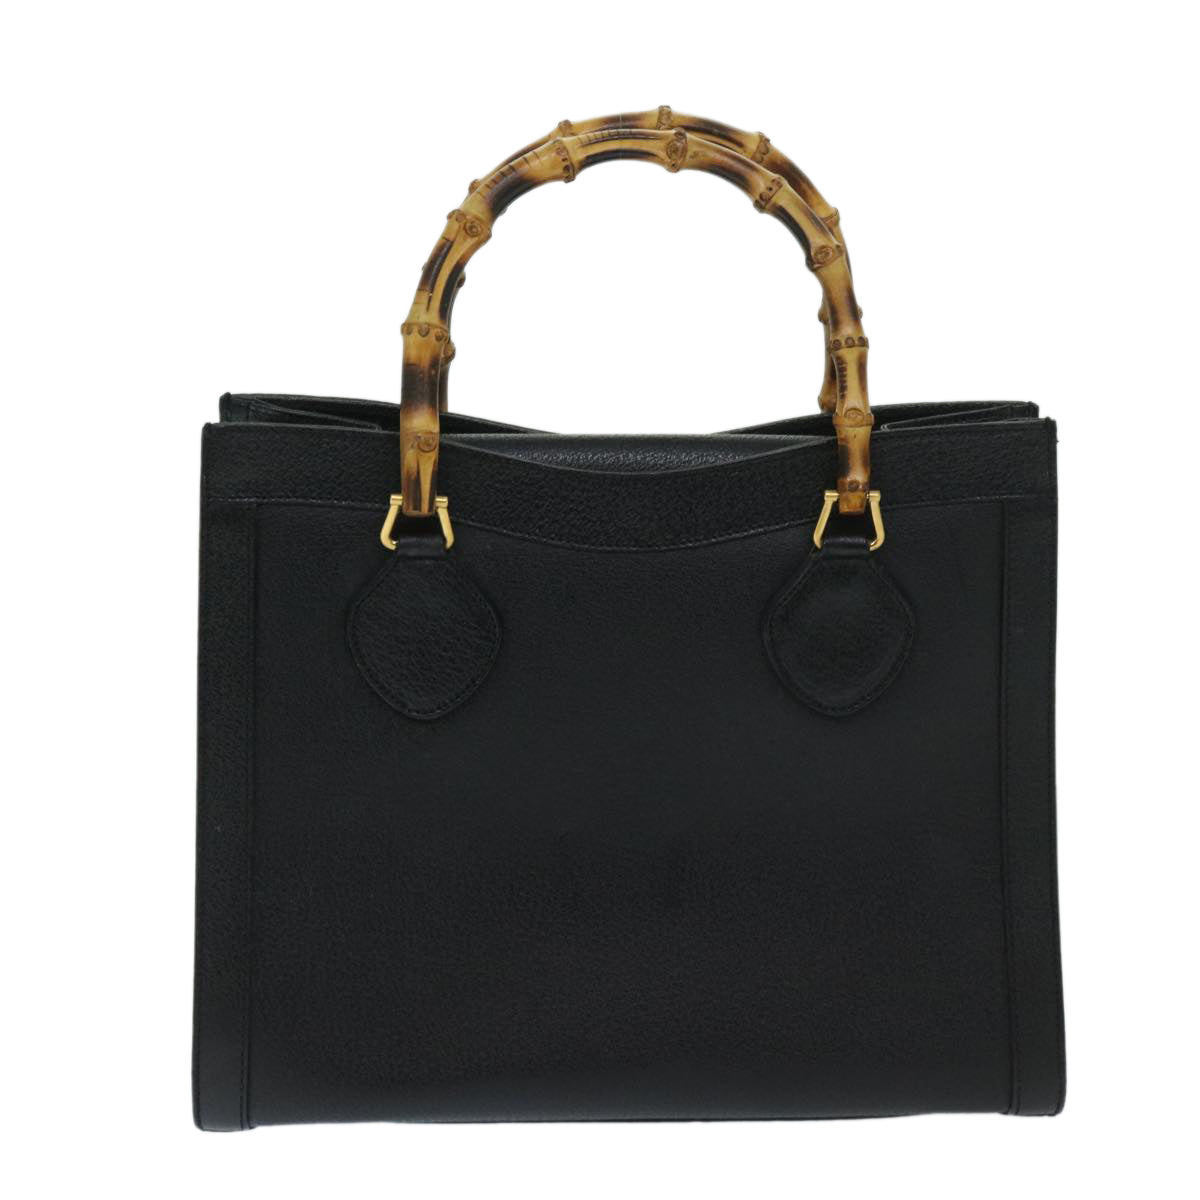 GUCCI Bamboo Tote Bag Leather Black Auth ep3669 - 0